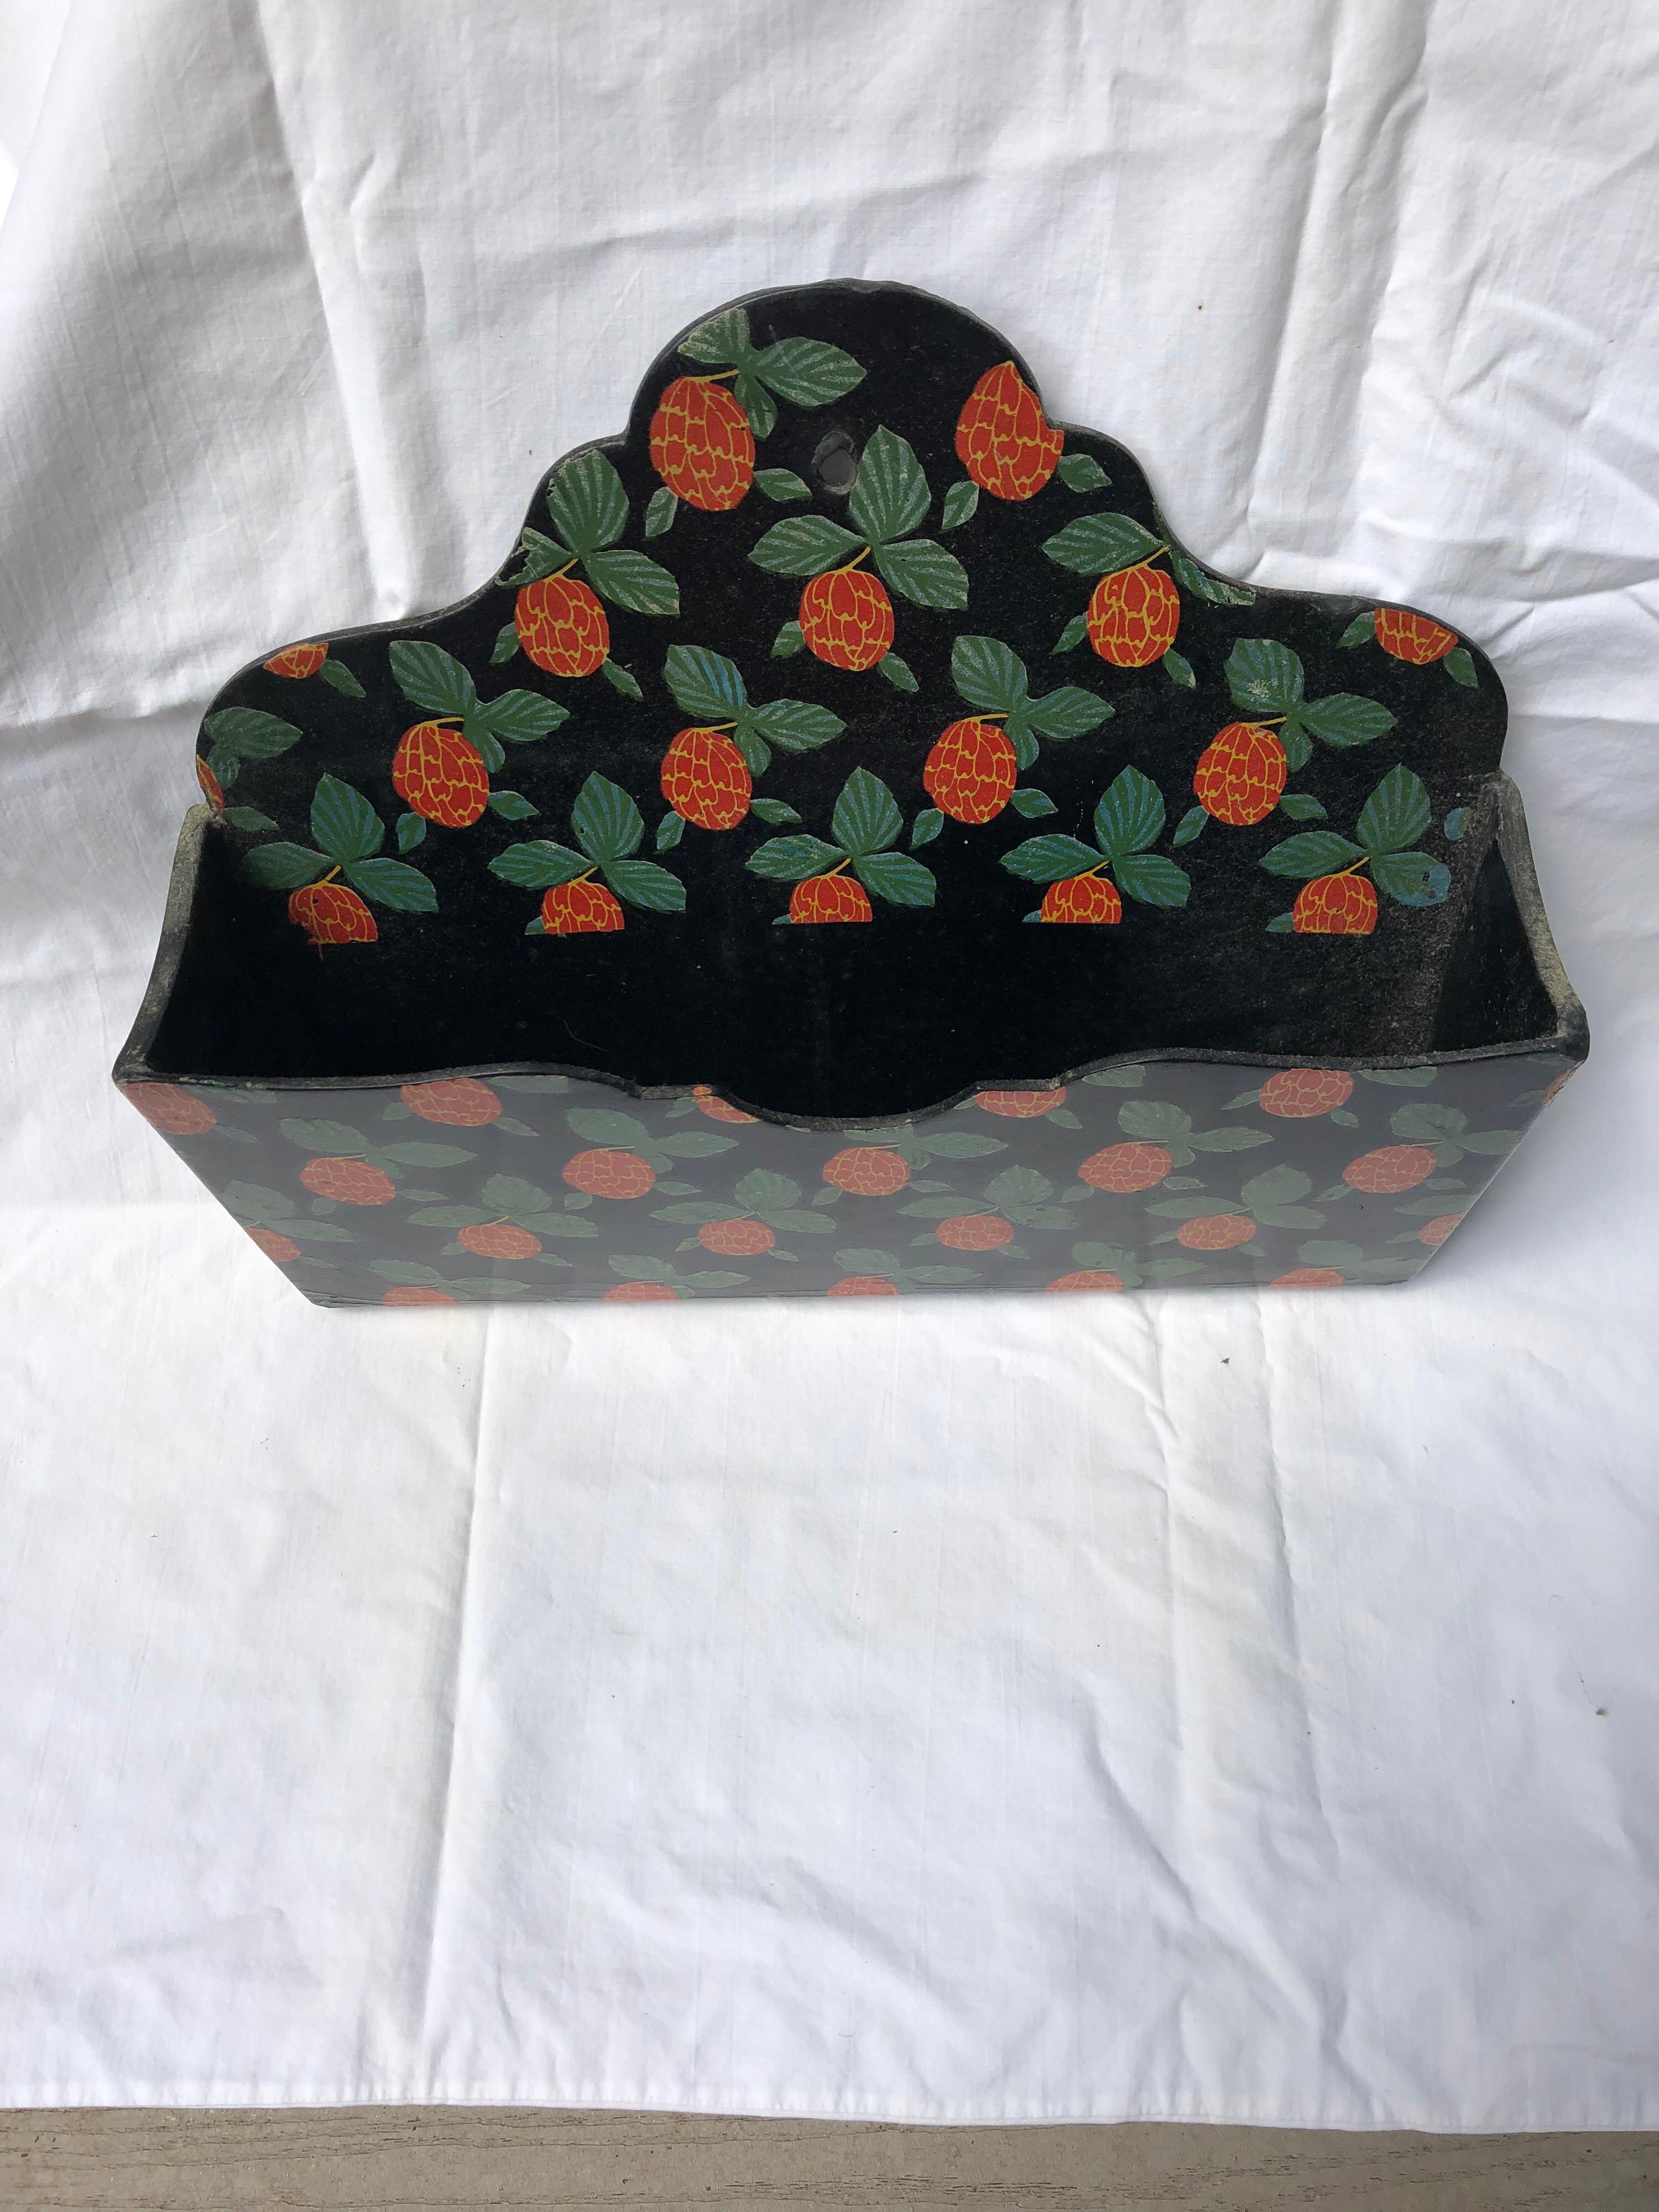 French papier-mâché letterholder or wall pocket with red painted kumquat decorations with green leaves and gold outlining on a black ground, circa 1870. There is a hole on the top to hang the piece.